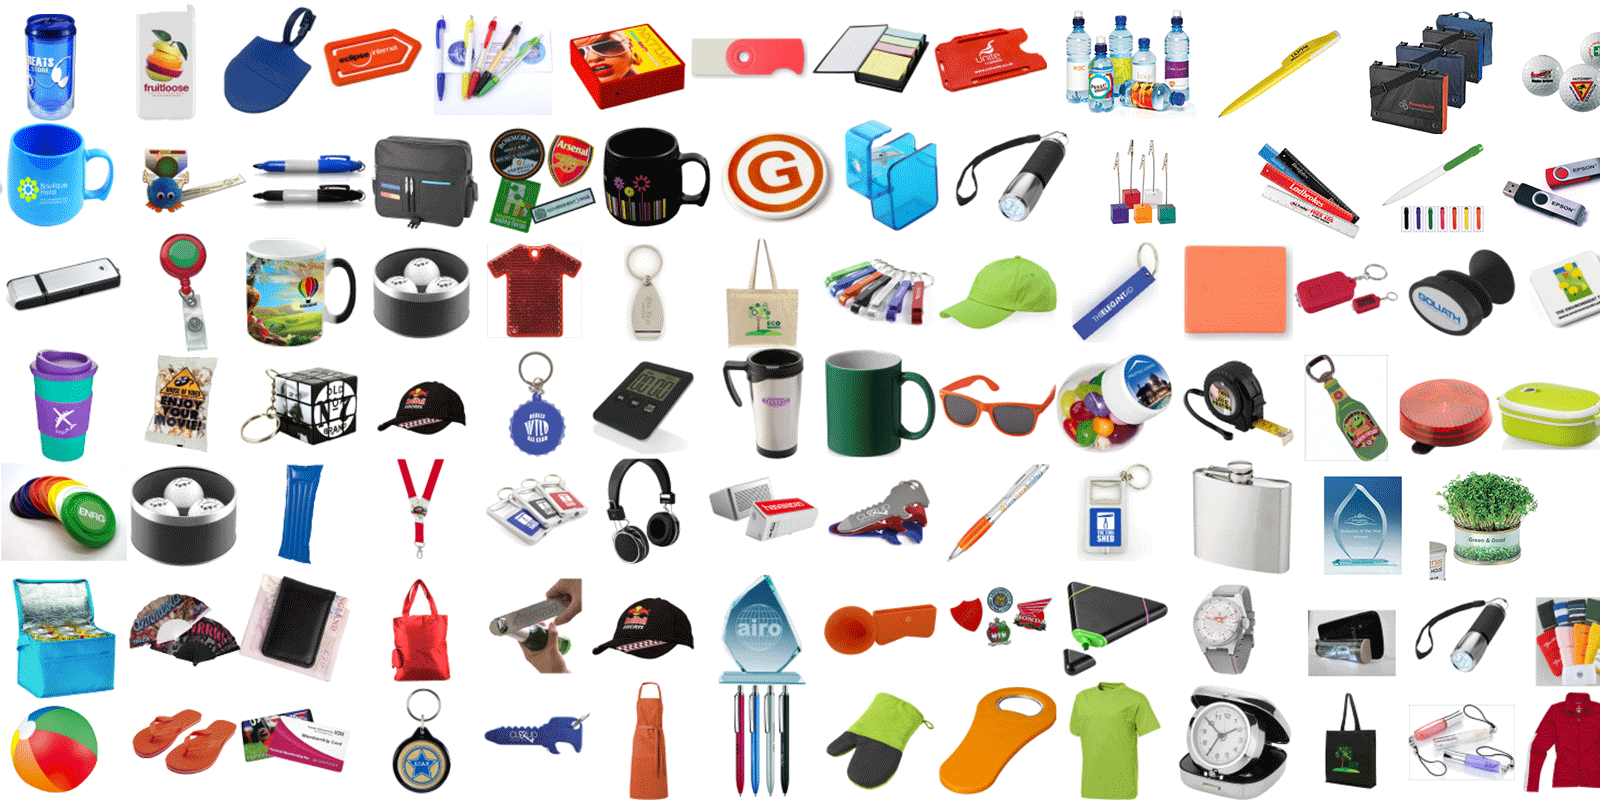 Getting Strategic with Promotional Products - SignalGraphics